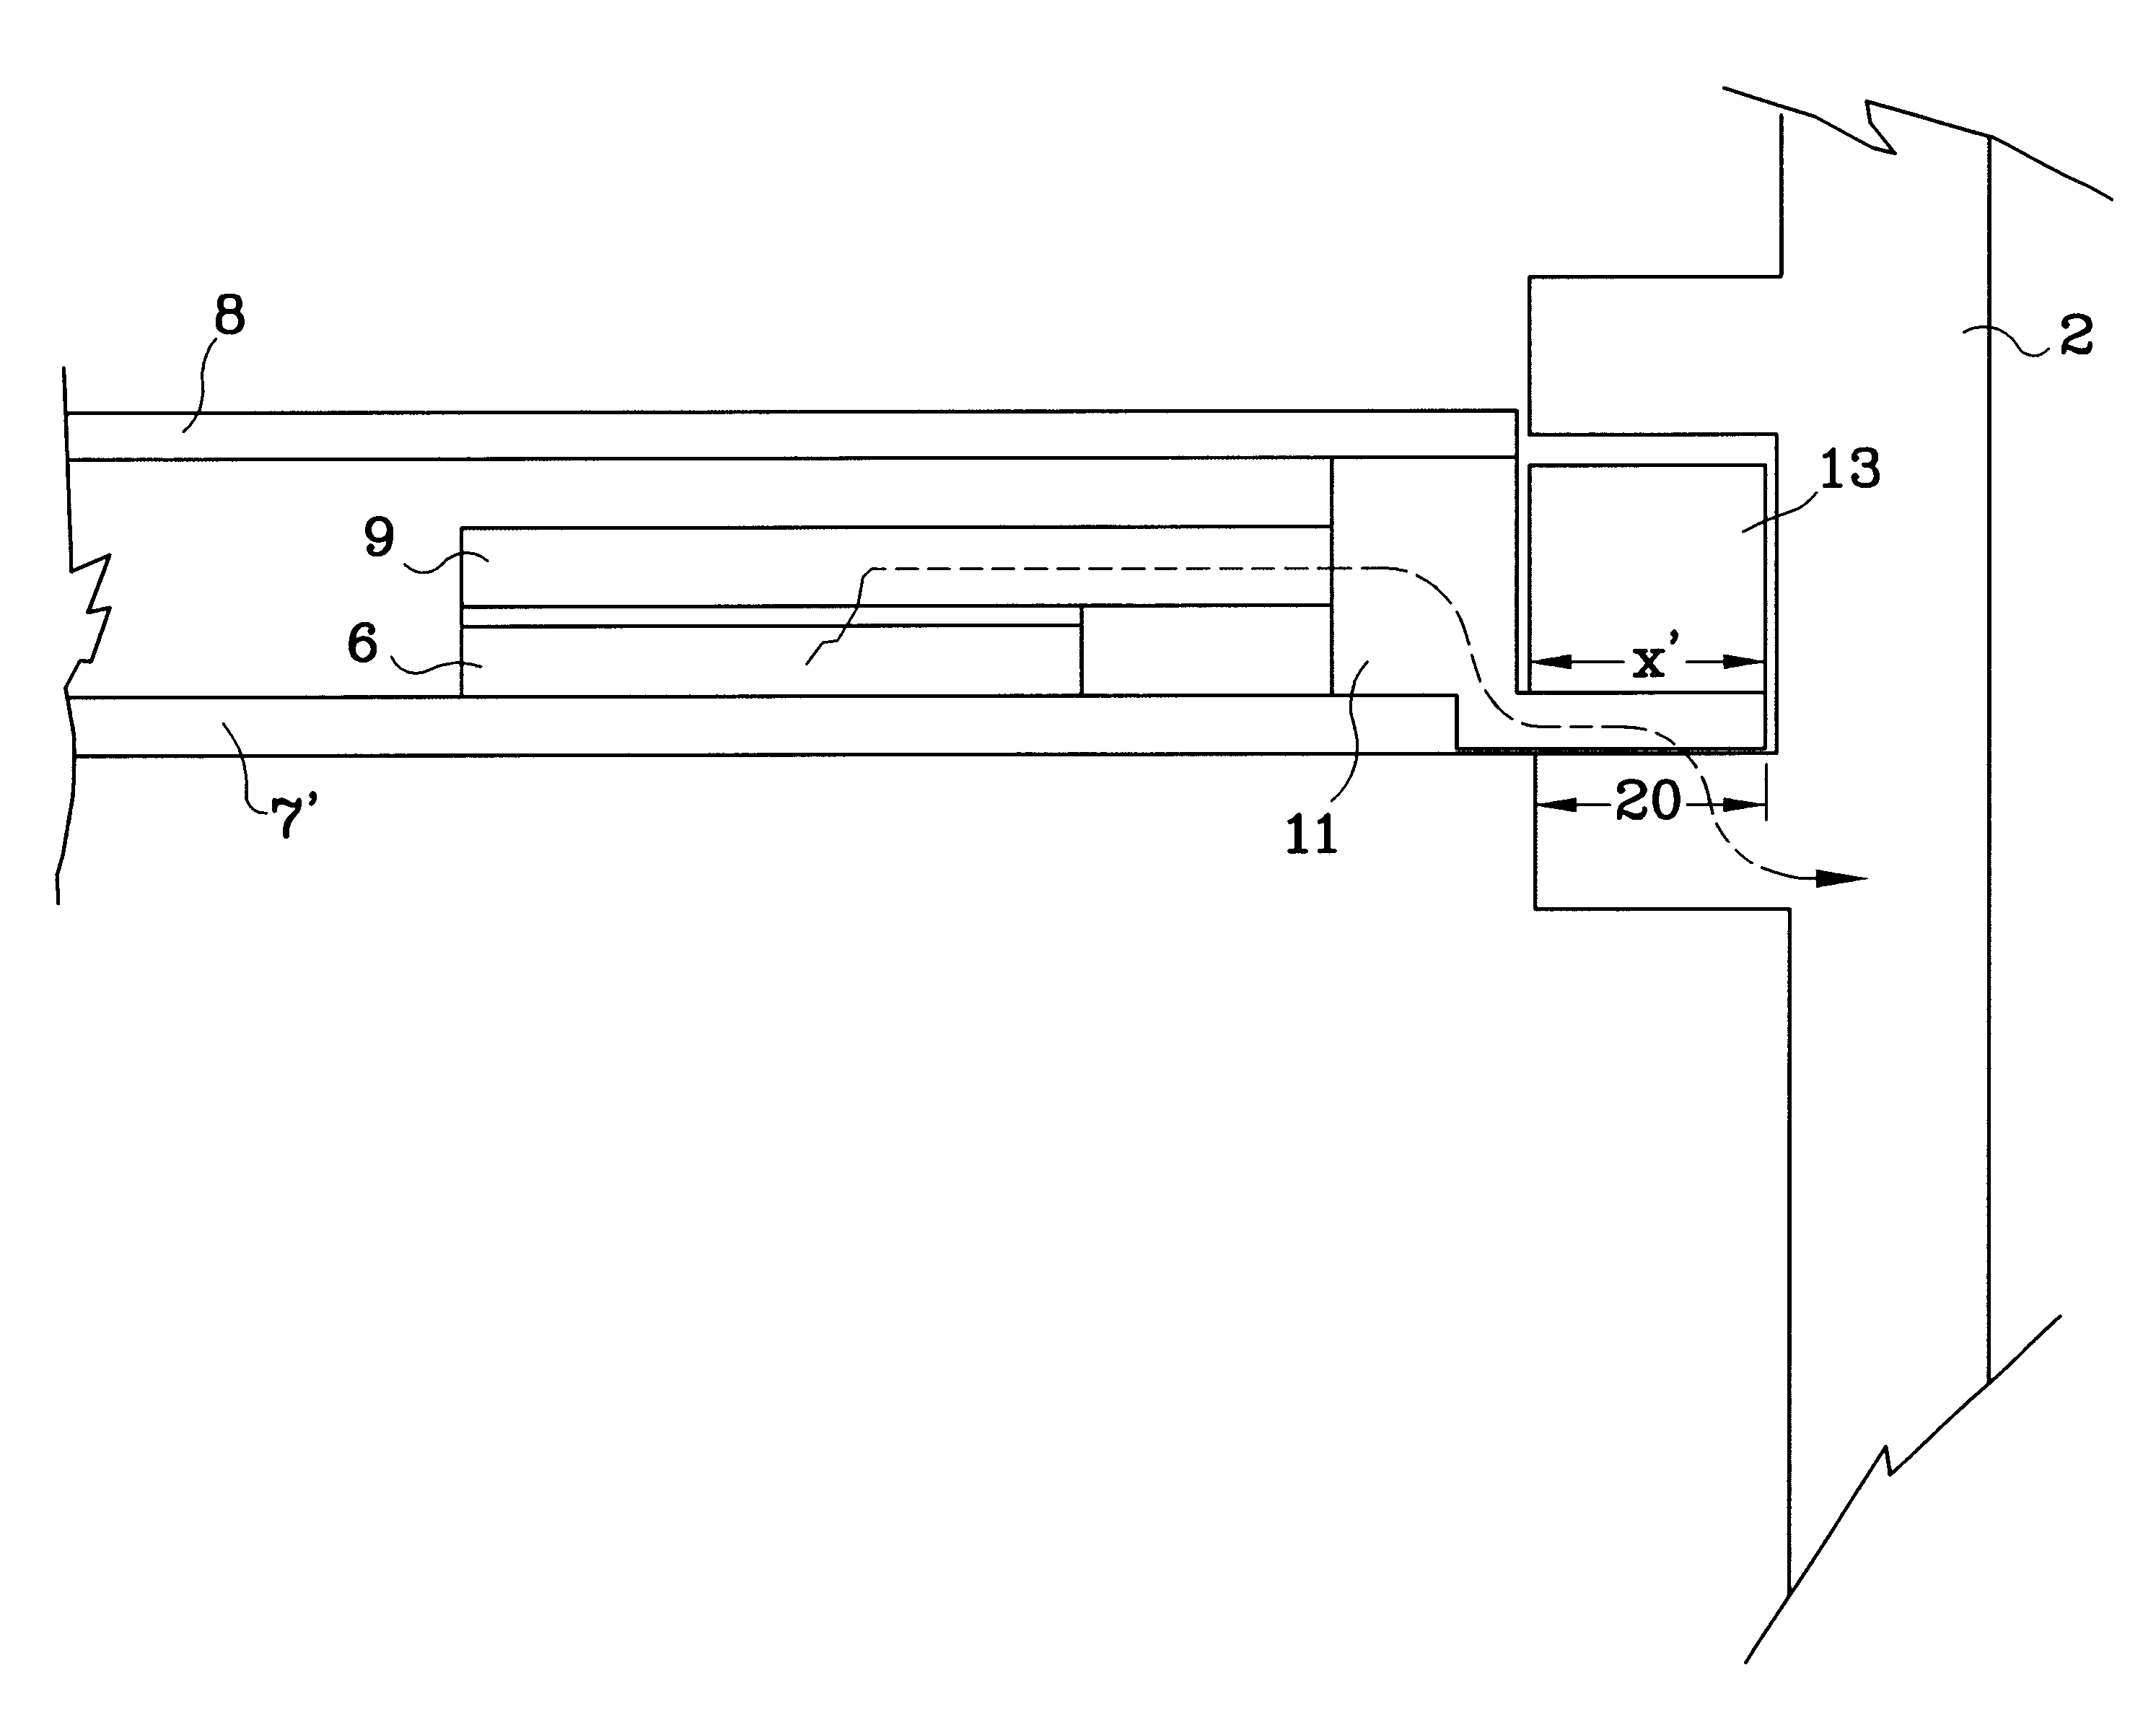 Interchangeable stiffening frame with extended width wedgelock for use in a circuit card module